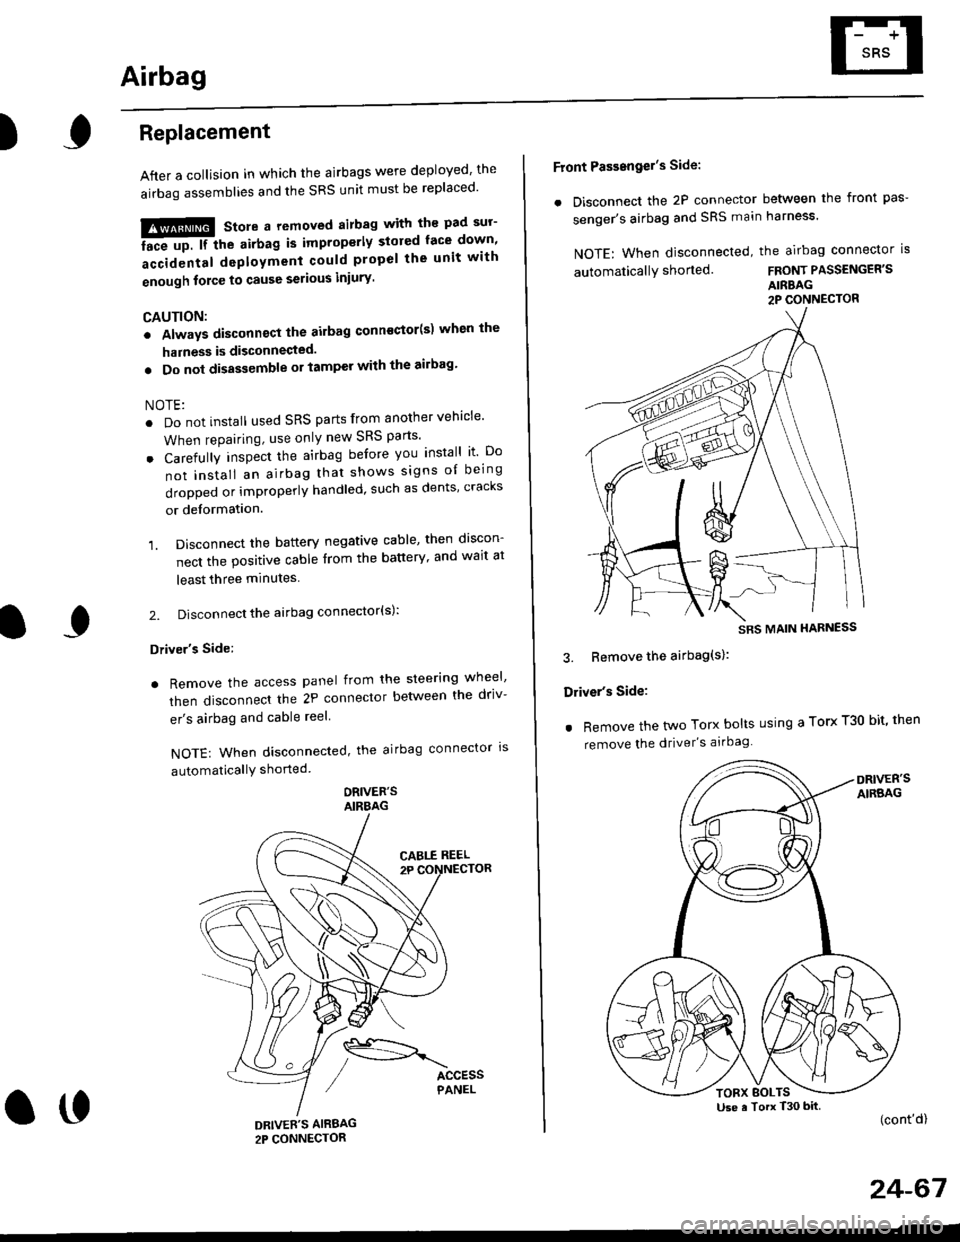 HONDA CIVIC 1997 6.G Service Manual Airbag
)Replacement
After a collision in which the airbags were deployed the
airbag assemblies and the SRS unit must be replaced
!!!@ Store a removed airbag with the pad sur
iFup. rr trt" airbag is